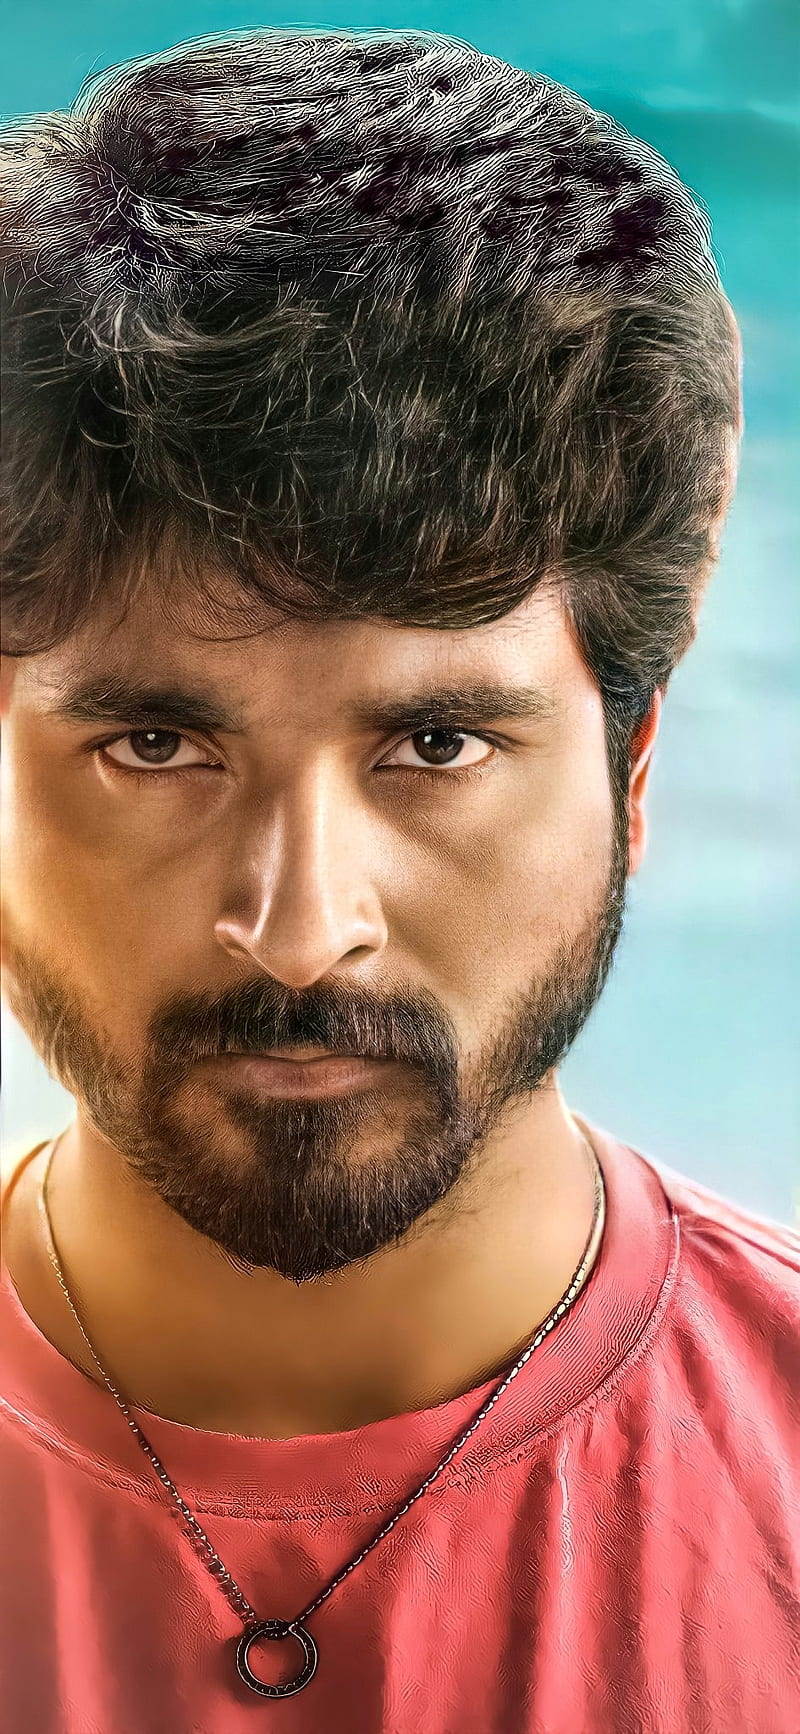 Incredible Compilation of Sivakarthikeyan HD Images: Over 999 Stunning Photos in Full 4K Resolution